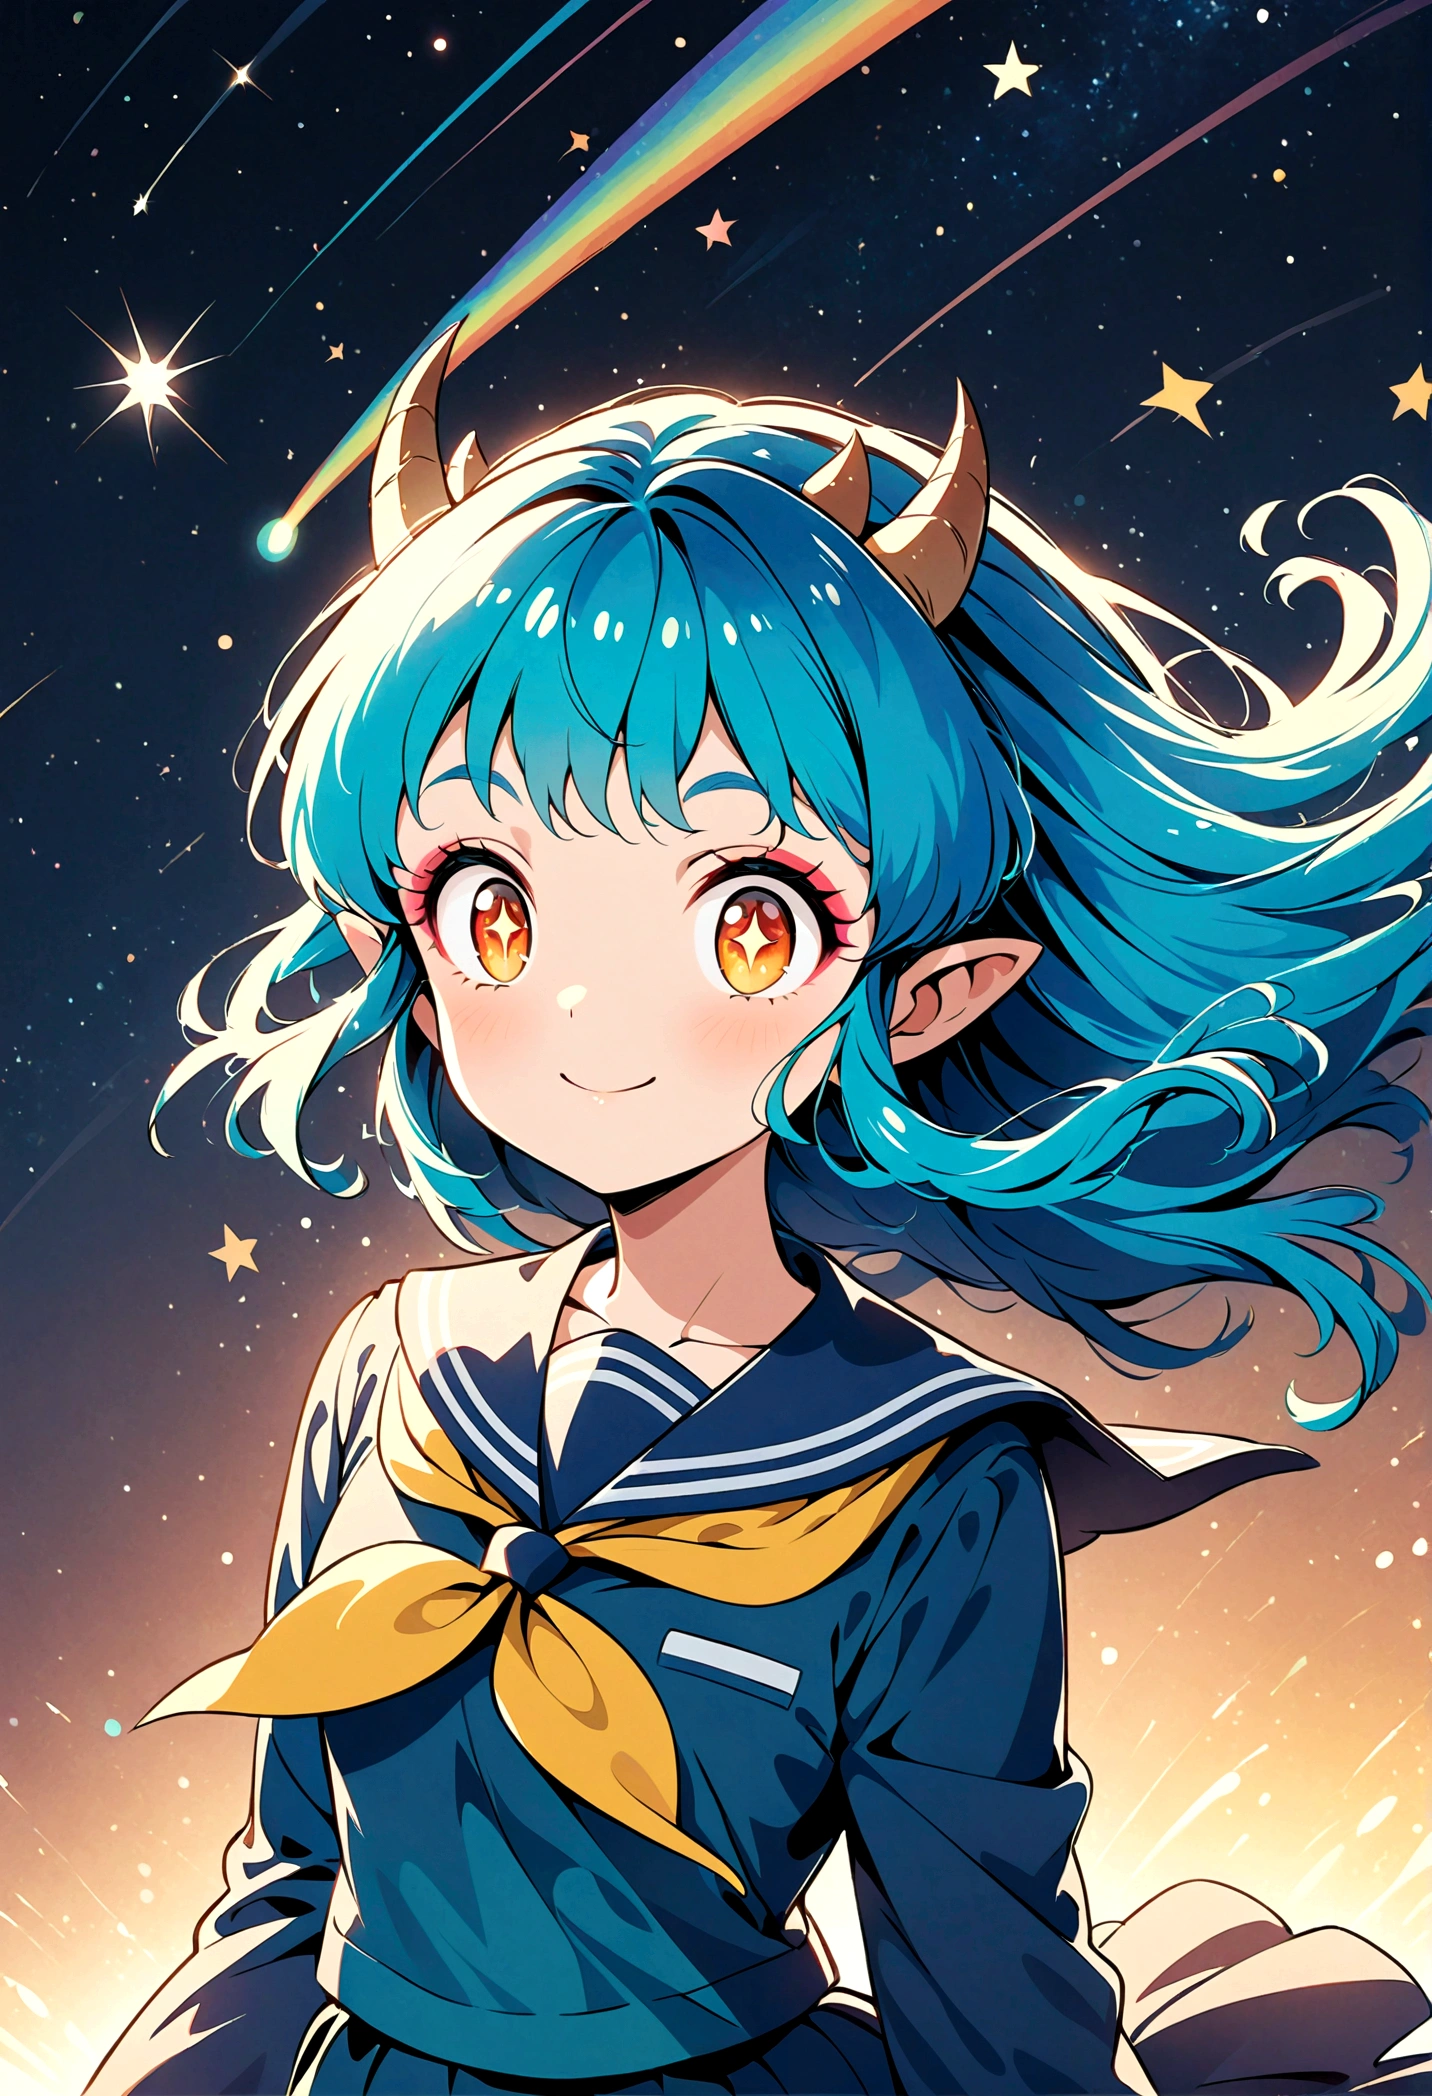 takahashi rumiko style,(1 girl,Lum,long hair,bangs,blue hair,orange eyes,horns,pointy ears,aqua hair,oni horns,(eyeshadow),(shirt,long sleeves,sailor suit,sailor collar,neckerchief,yellow neckerchief,blue shirt,blue sailor collar,blue skirt),the character Lum from "Urusei Yatsura",Do cute girly poses,bright smile,fine,Lum is floating in the air,lightning effect,Bright and cheerful atmosphere,BREAK,(Creates a POP illustration style background,Background elements such as space or a starry sky,Outer space with the moon and stars floating in it,rich colors,colorful,shooting star,draw with thick lines,Sparkling,unbelievably absurd,zentangle elements,vector art),beautiful light and shadow,BREAK,(masterpiece:1.3),(highest quality:1.4),(ultra detailed:1.5),High resolution,extremely detailed,unity 8k wallpaper